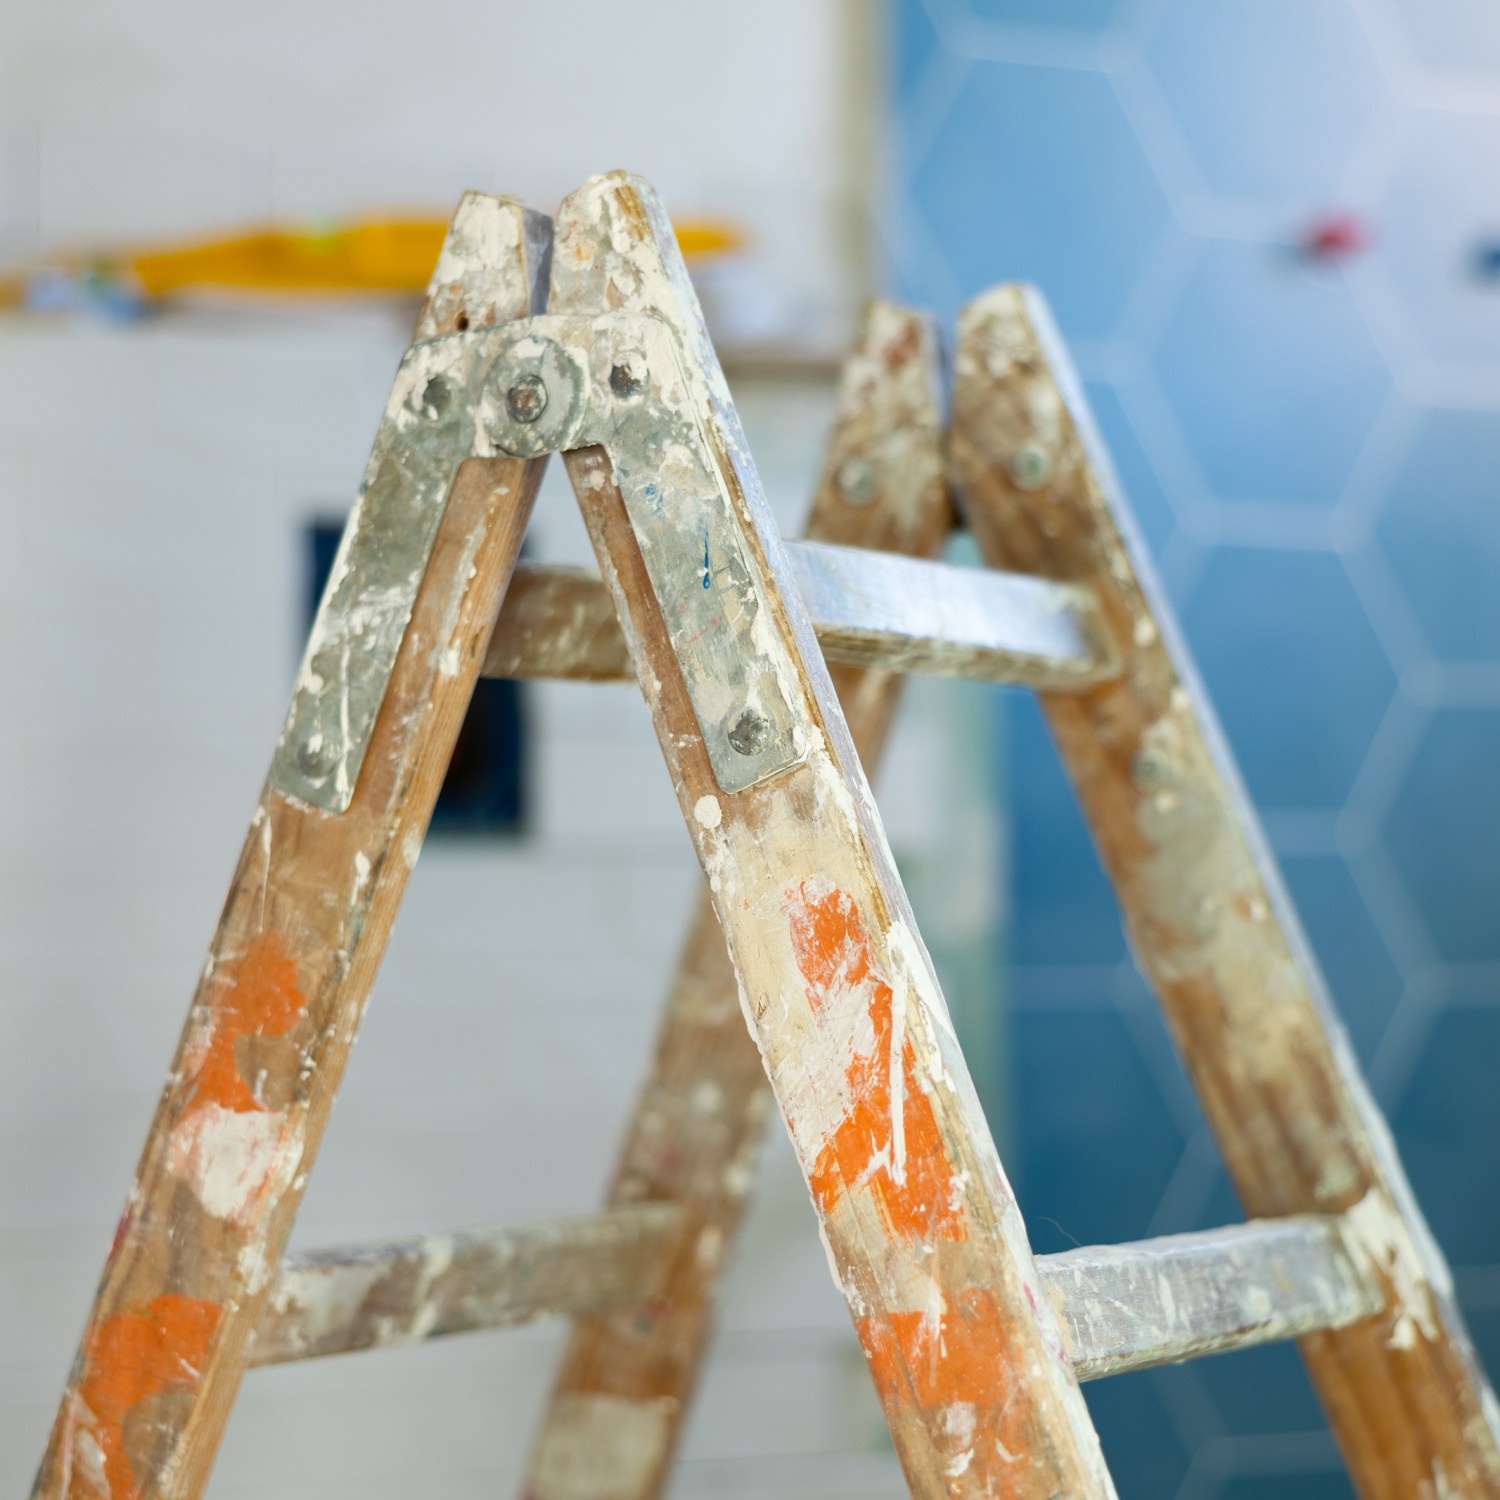 a wood ladder with paint splatter during easy and affordable home remodel ROI blurred blue tile in background